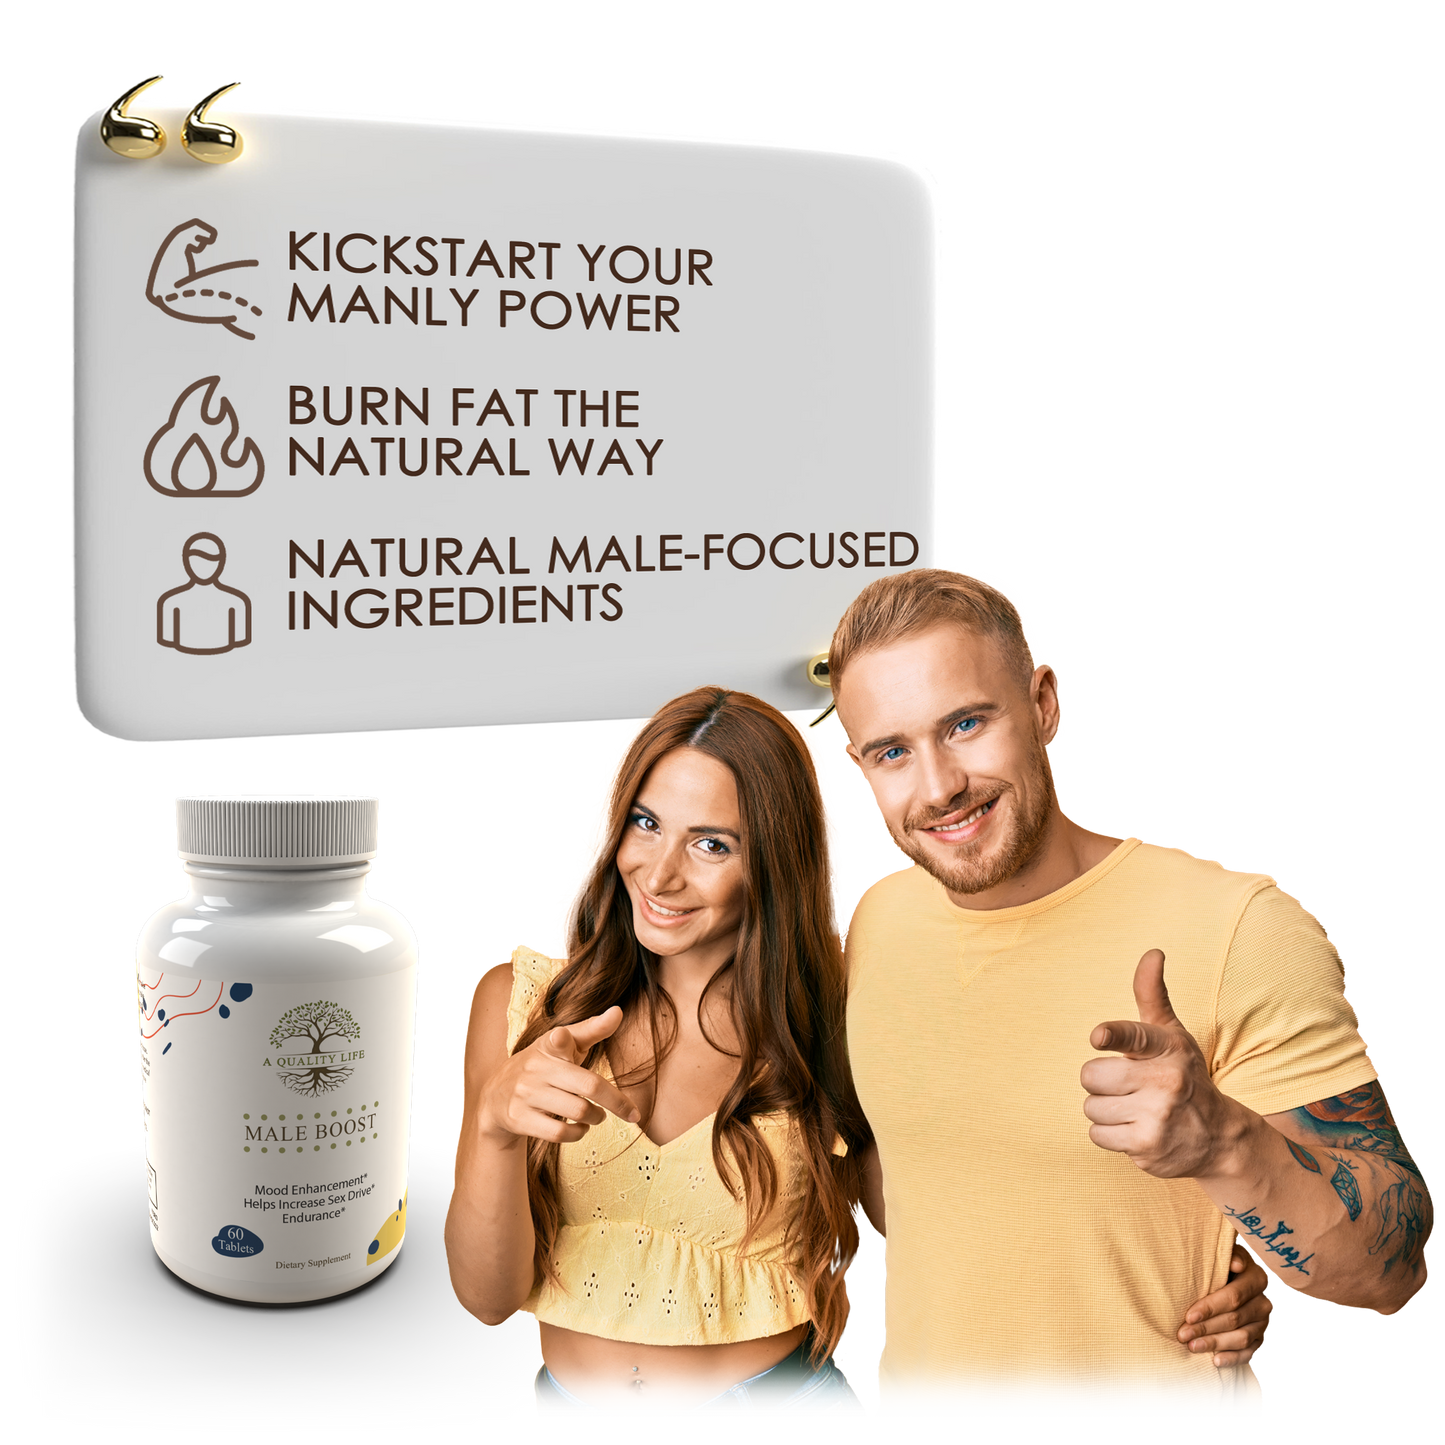 Male Boost by A Quality Life Nutrition